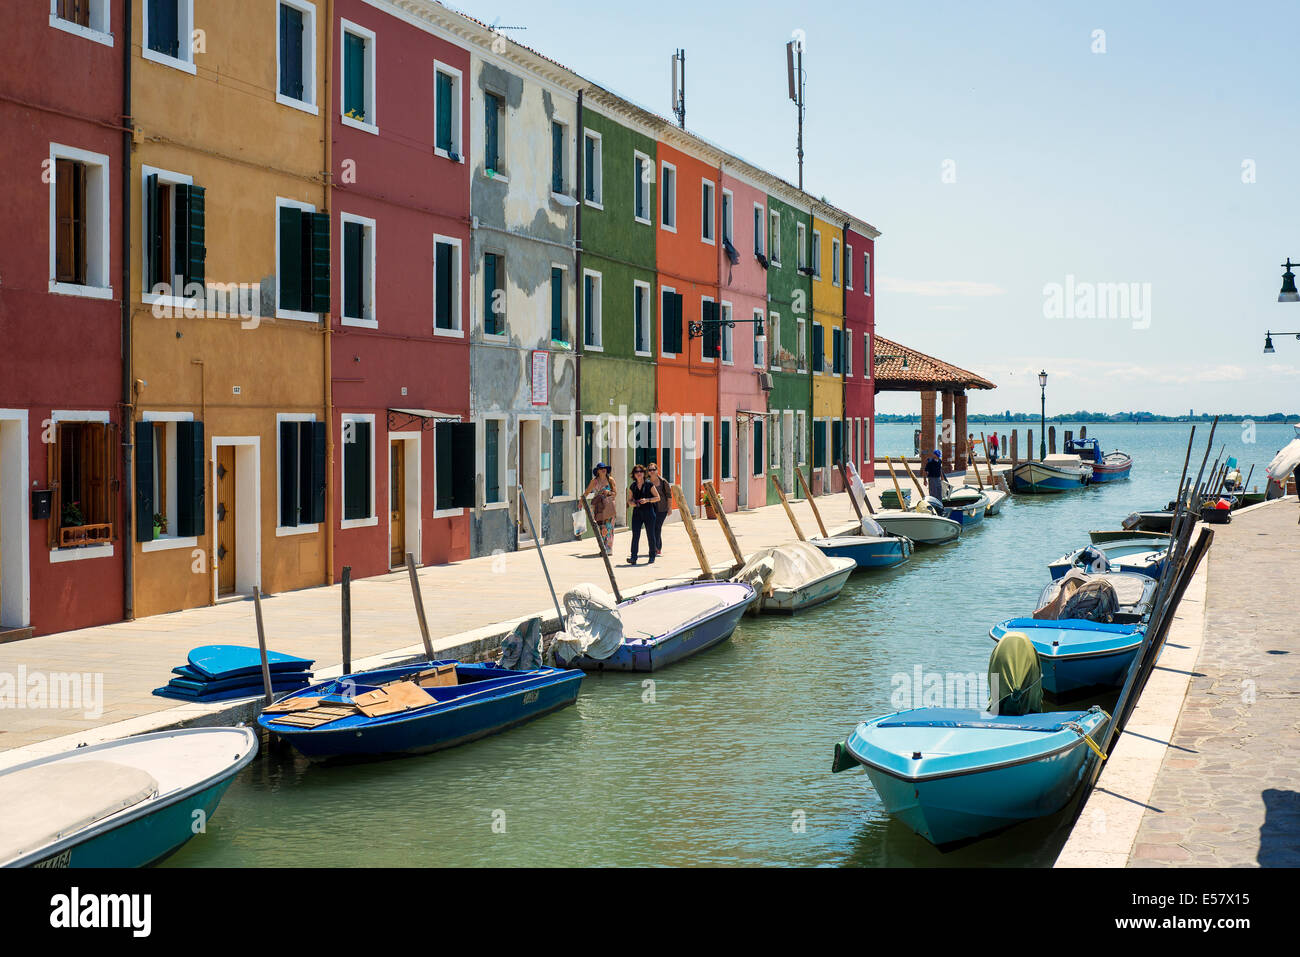 Tourists walk on a street of colored houses in Burano Stock Photo